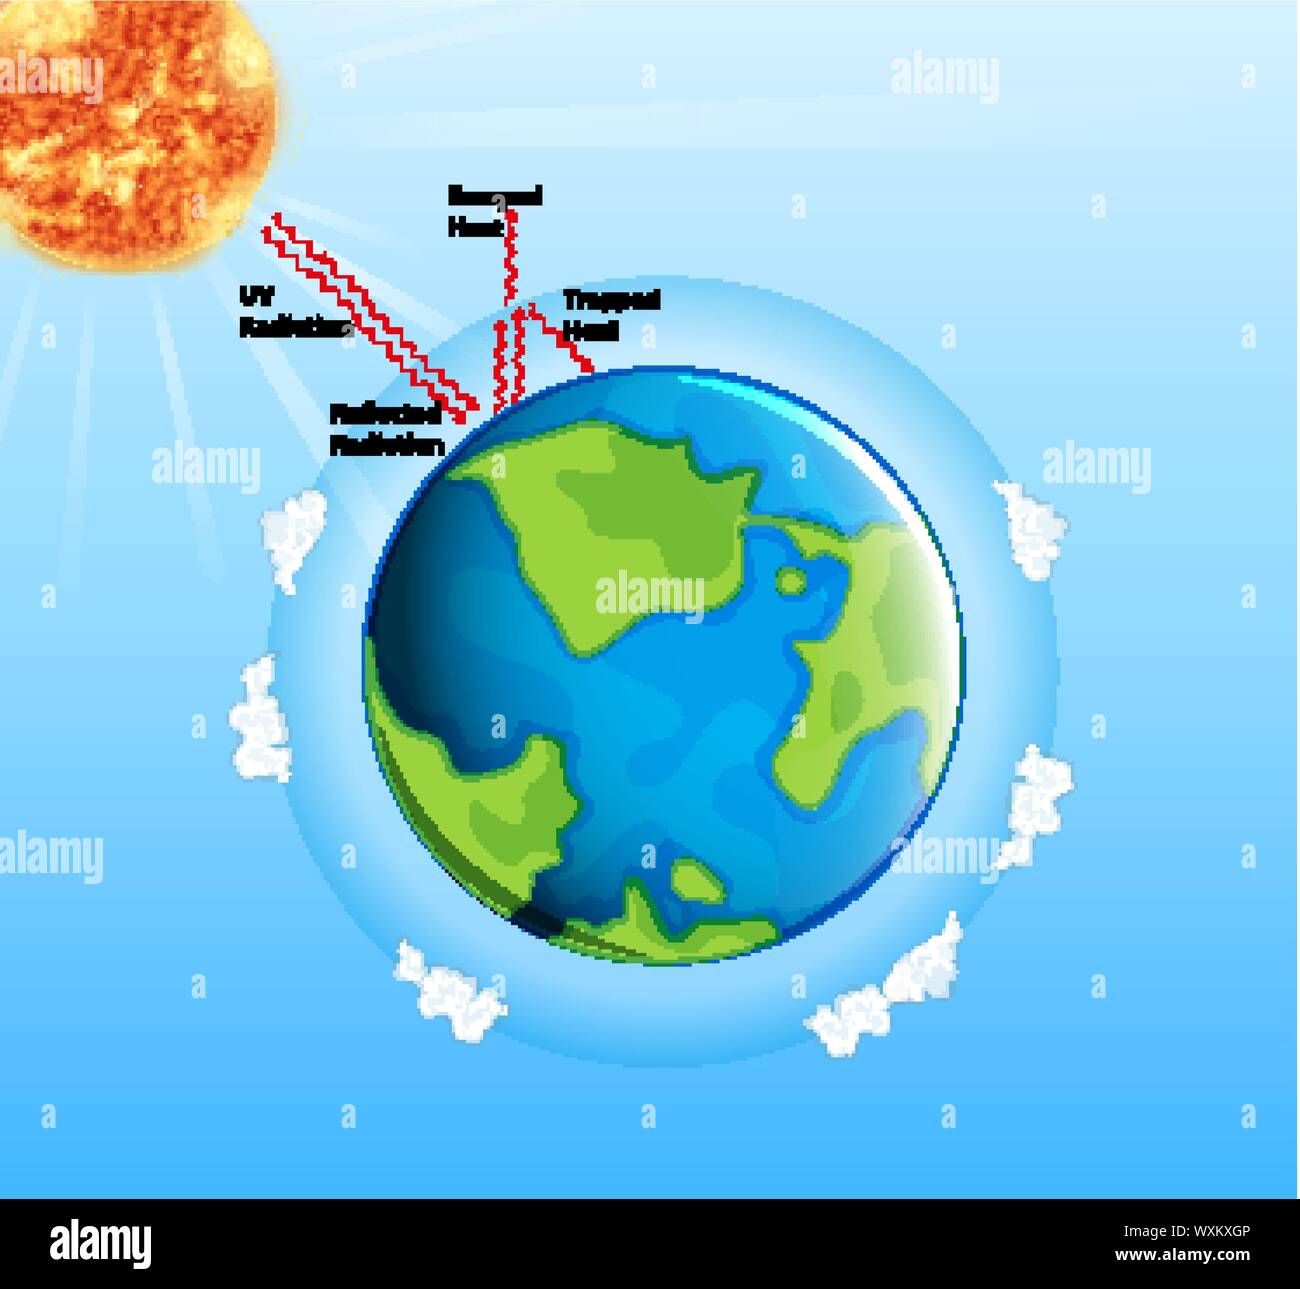 Diagram showing global warming on earth illustration Stock Vector